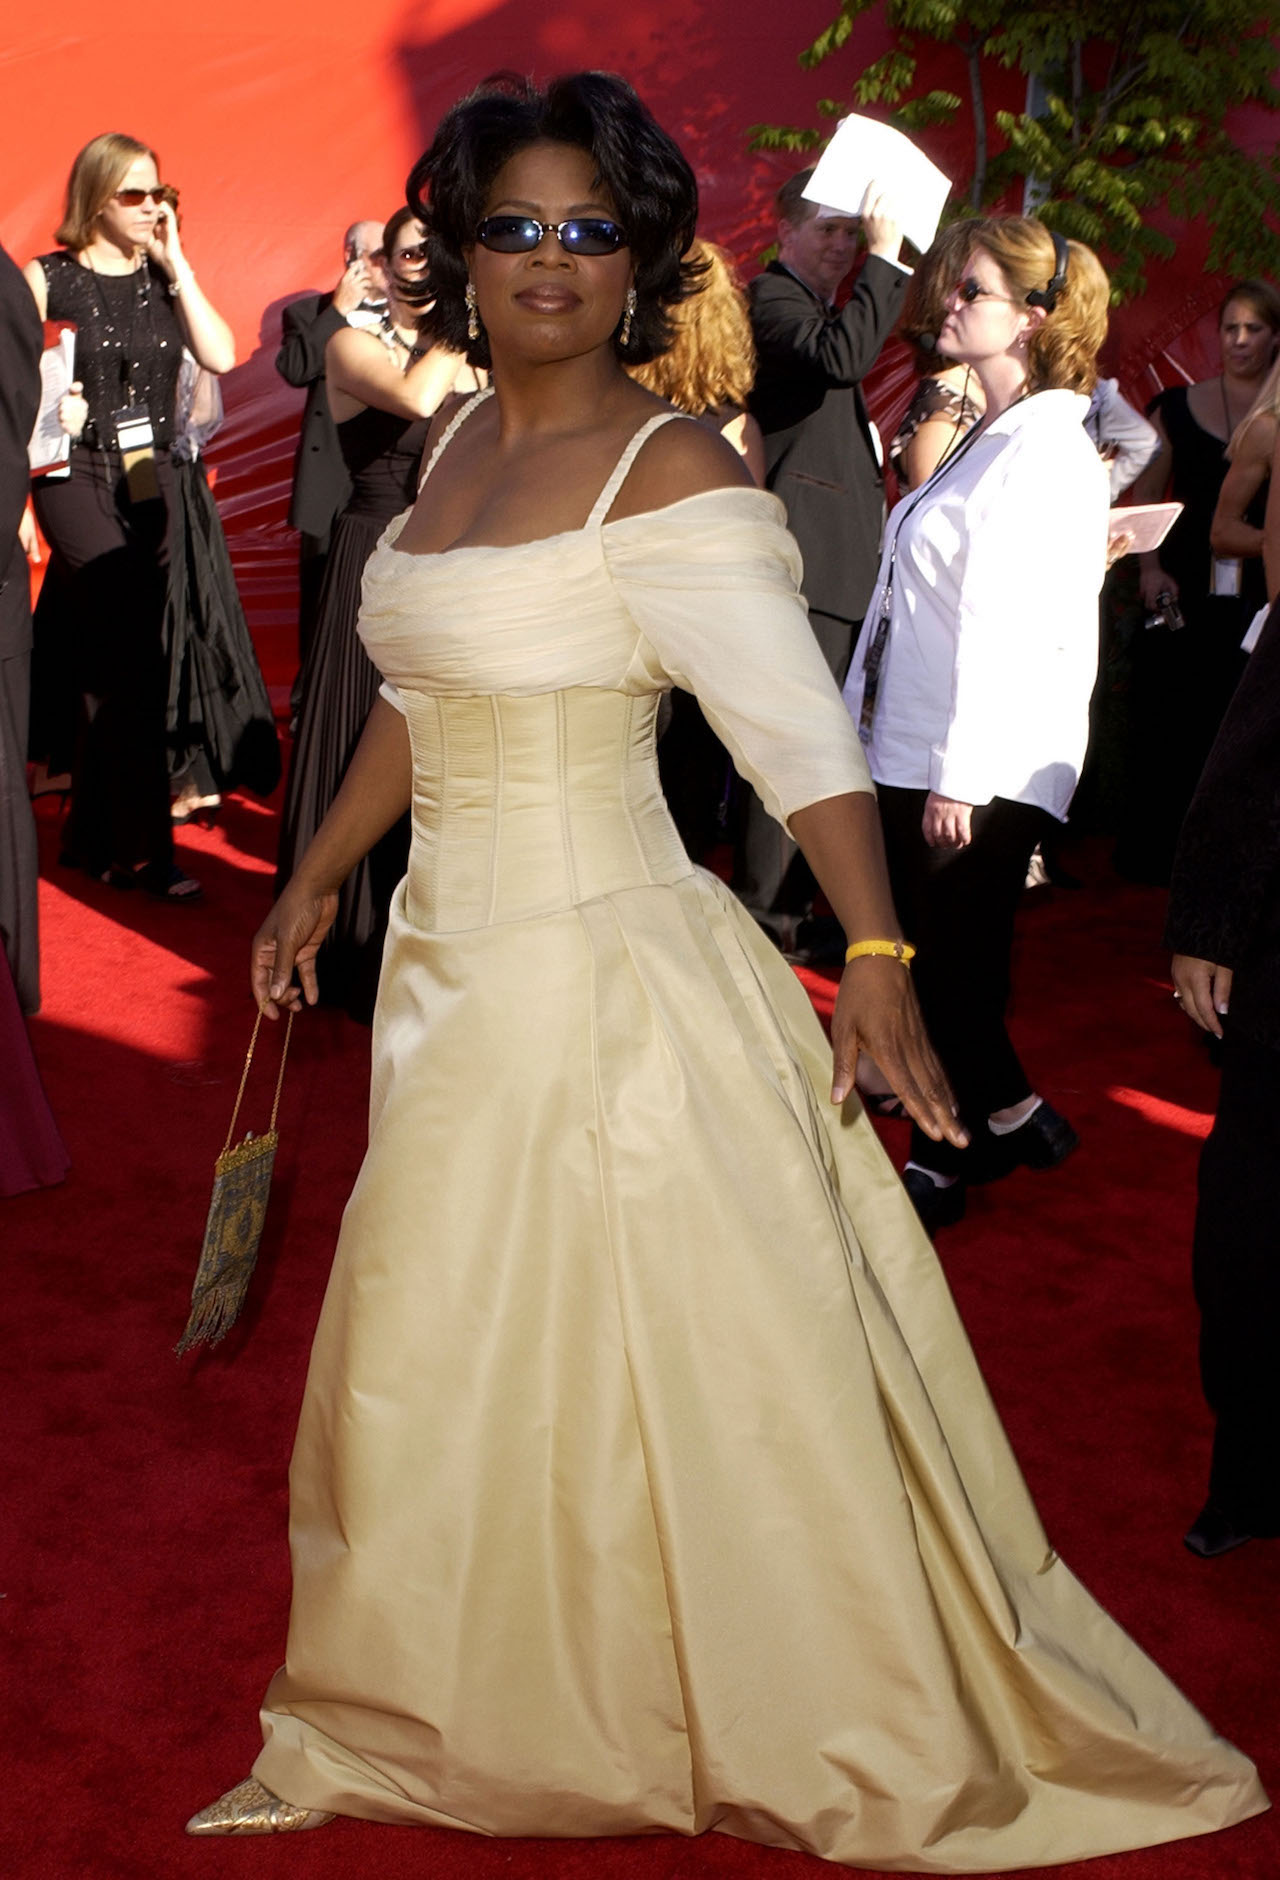 The Best Emmy Awards Fashion Moments of All Time